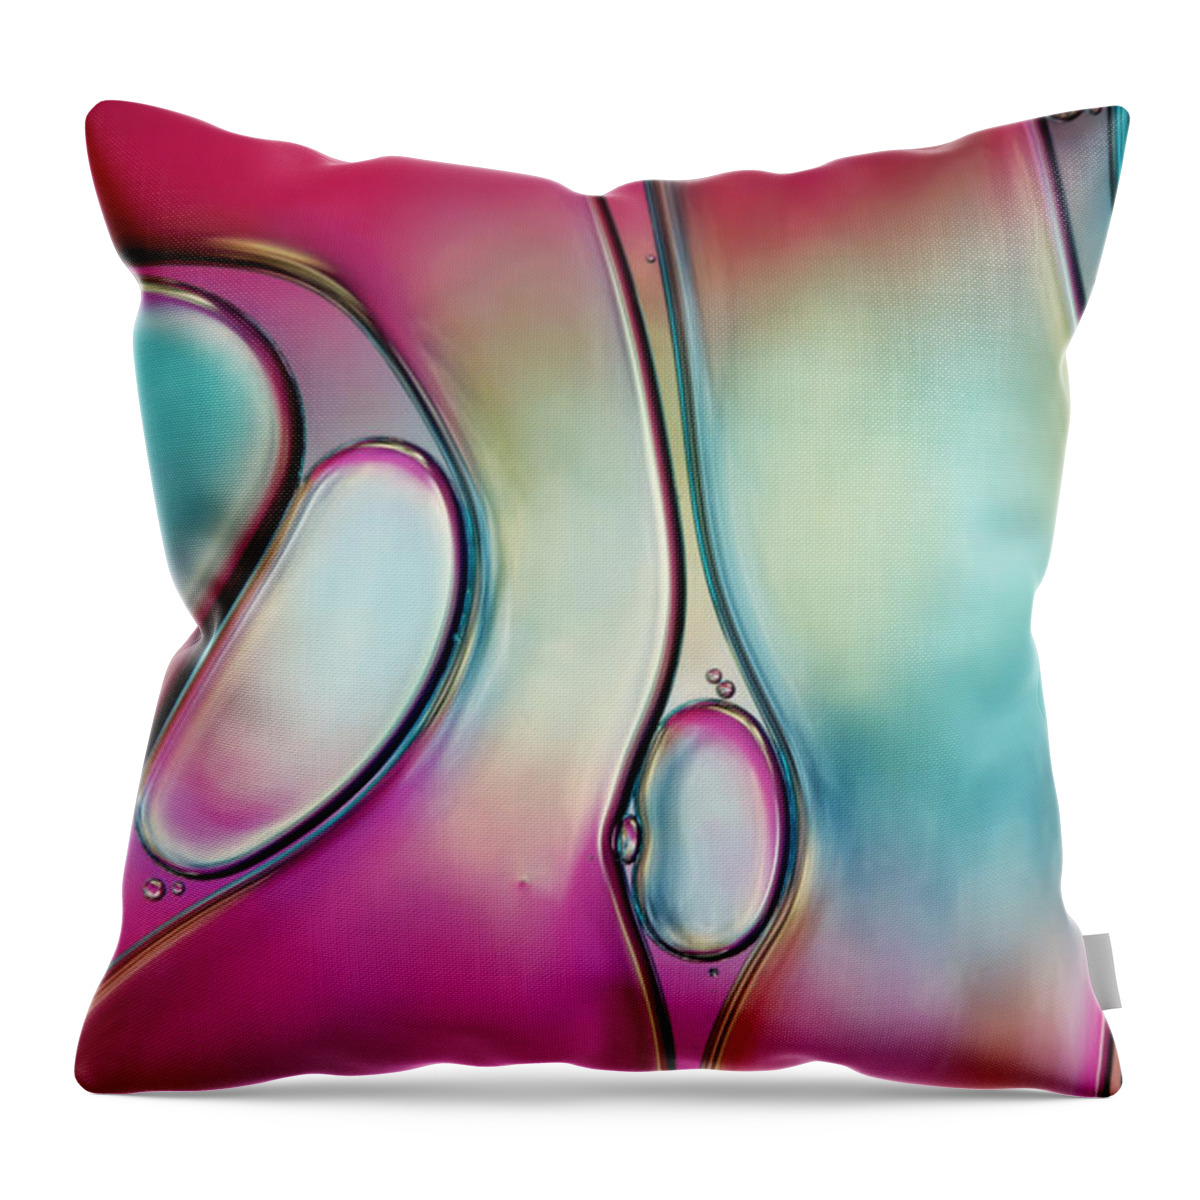 Oil Throw Pillow featuring the photograph Passion Pink Rainbow Swirls by Sharon Johnstone